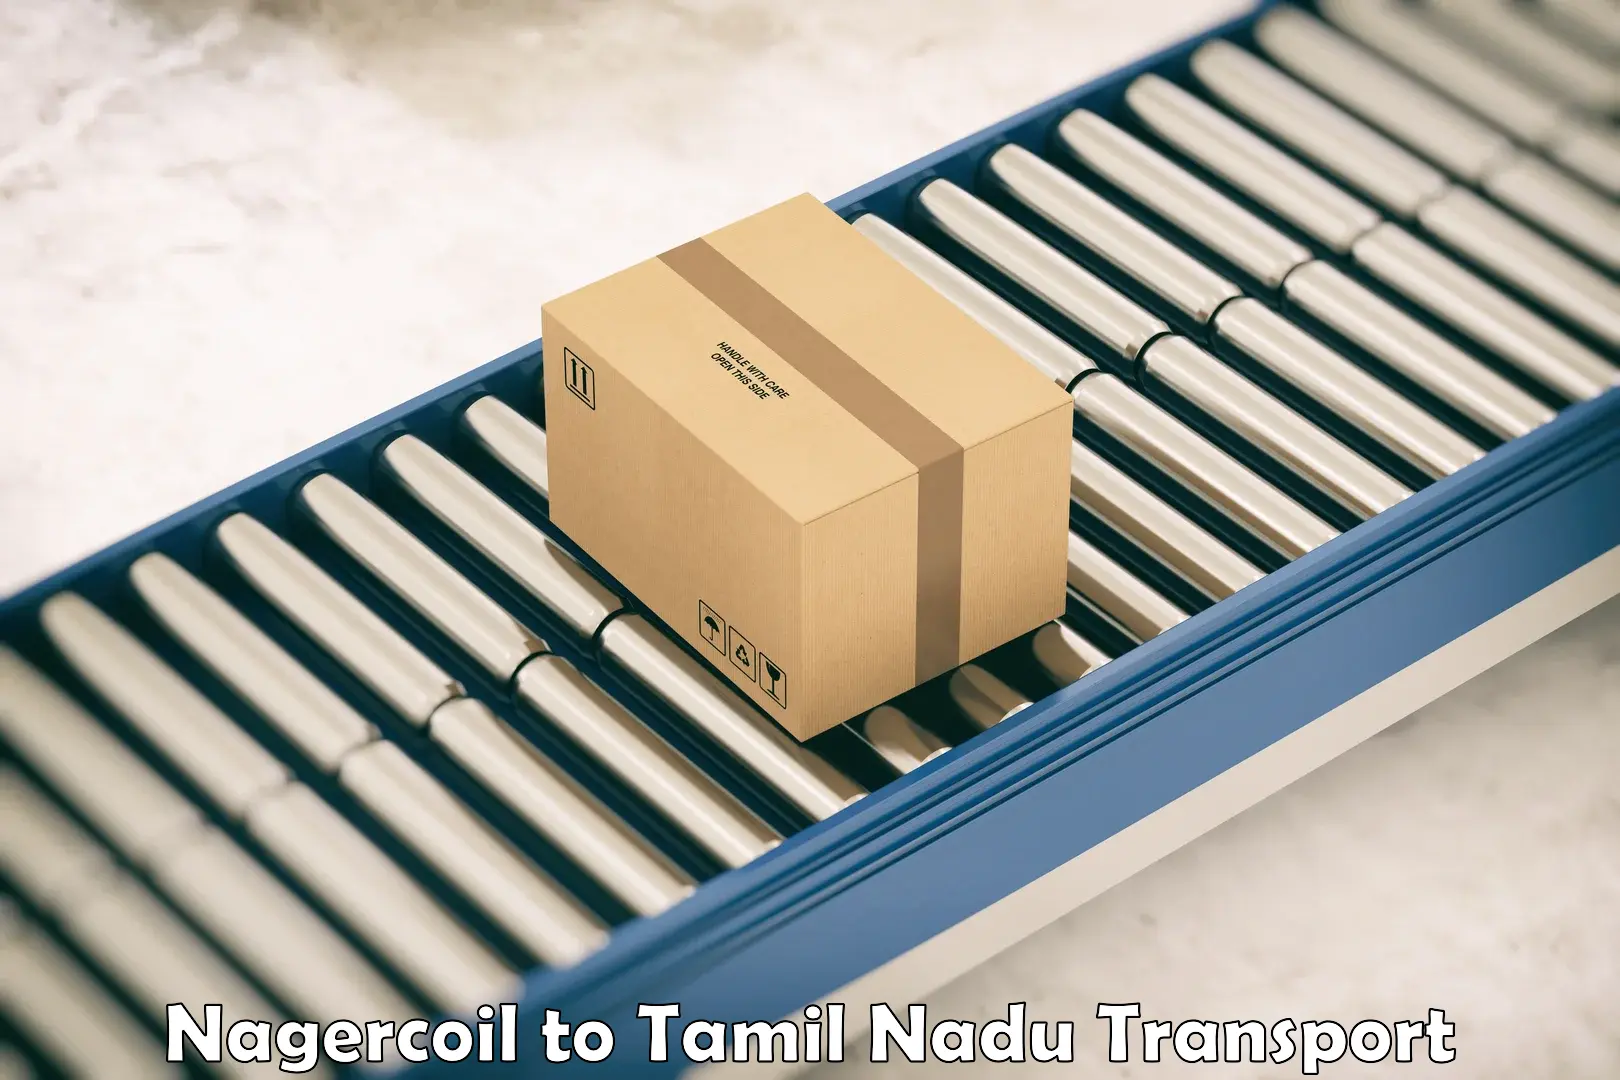 Furniture transport service Nagercoil to Memalur